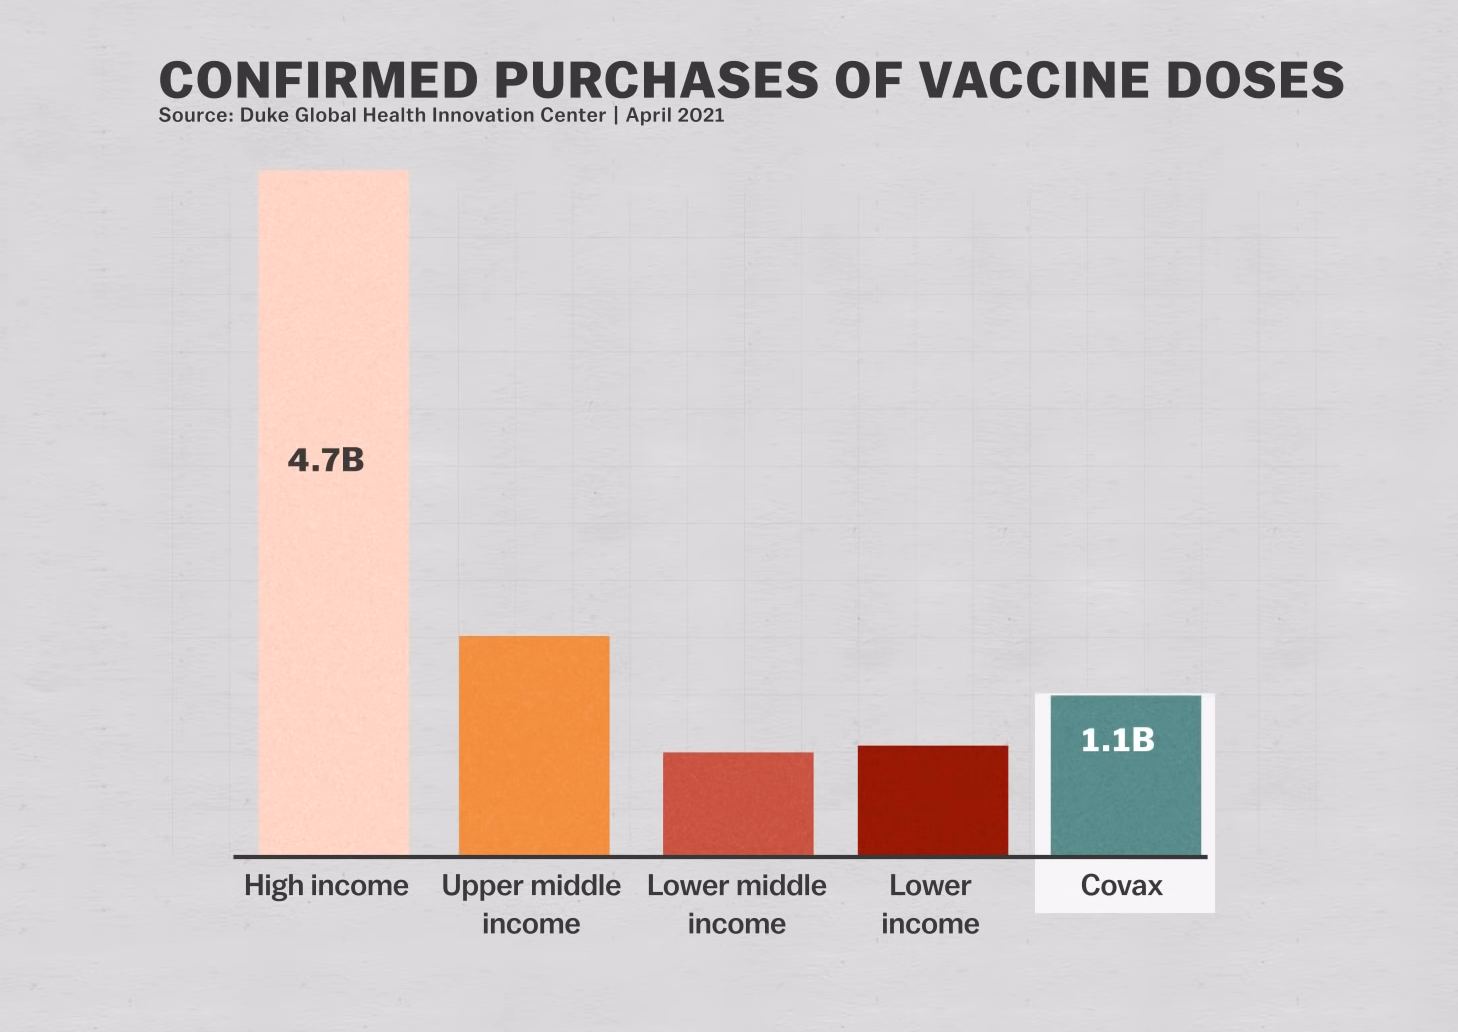 vaccine doses by covax